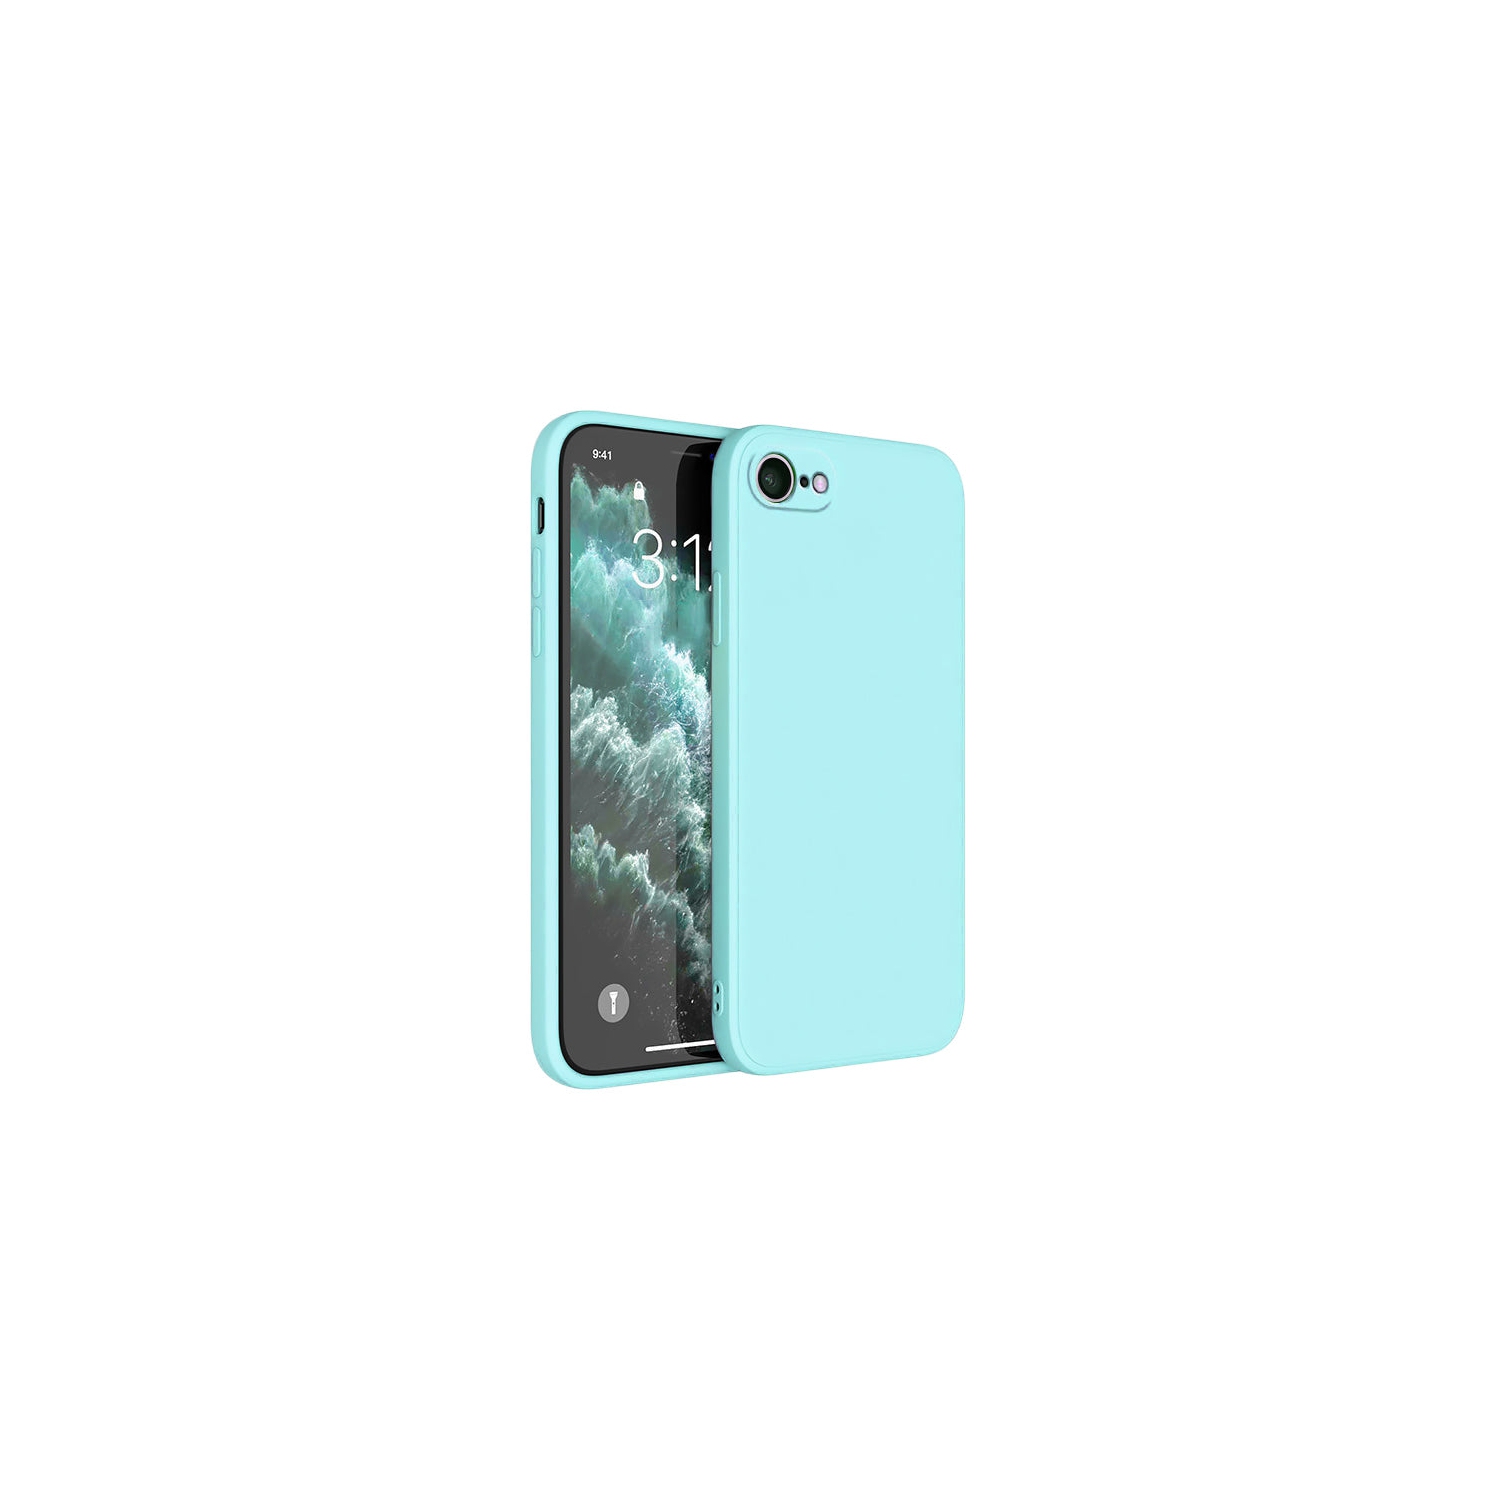 PANDACO Soft Shell Matte Mint Blue Case for iPhone 6 or iPhone 6S